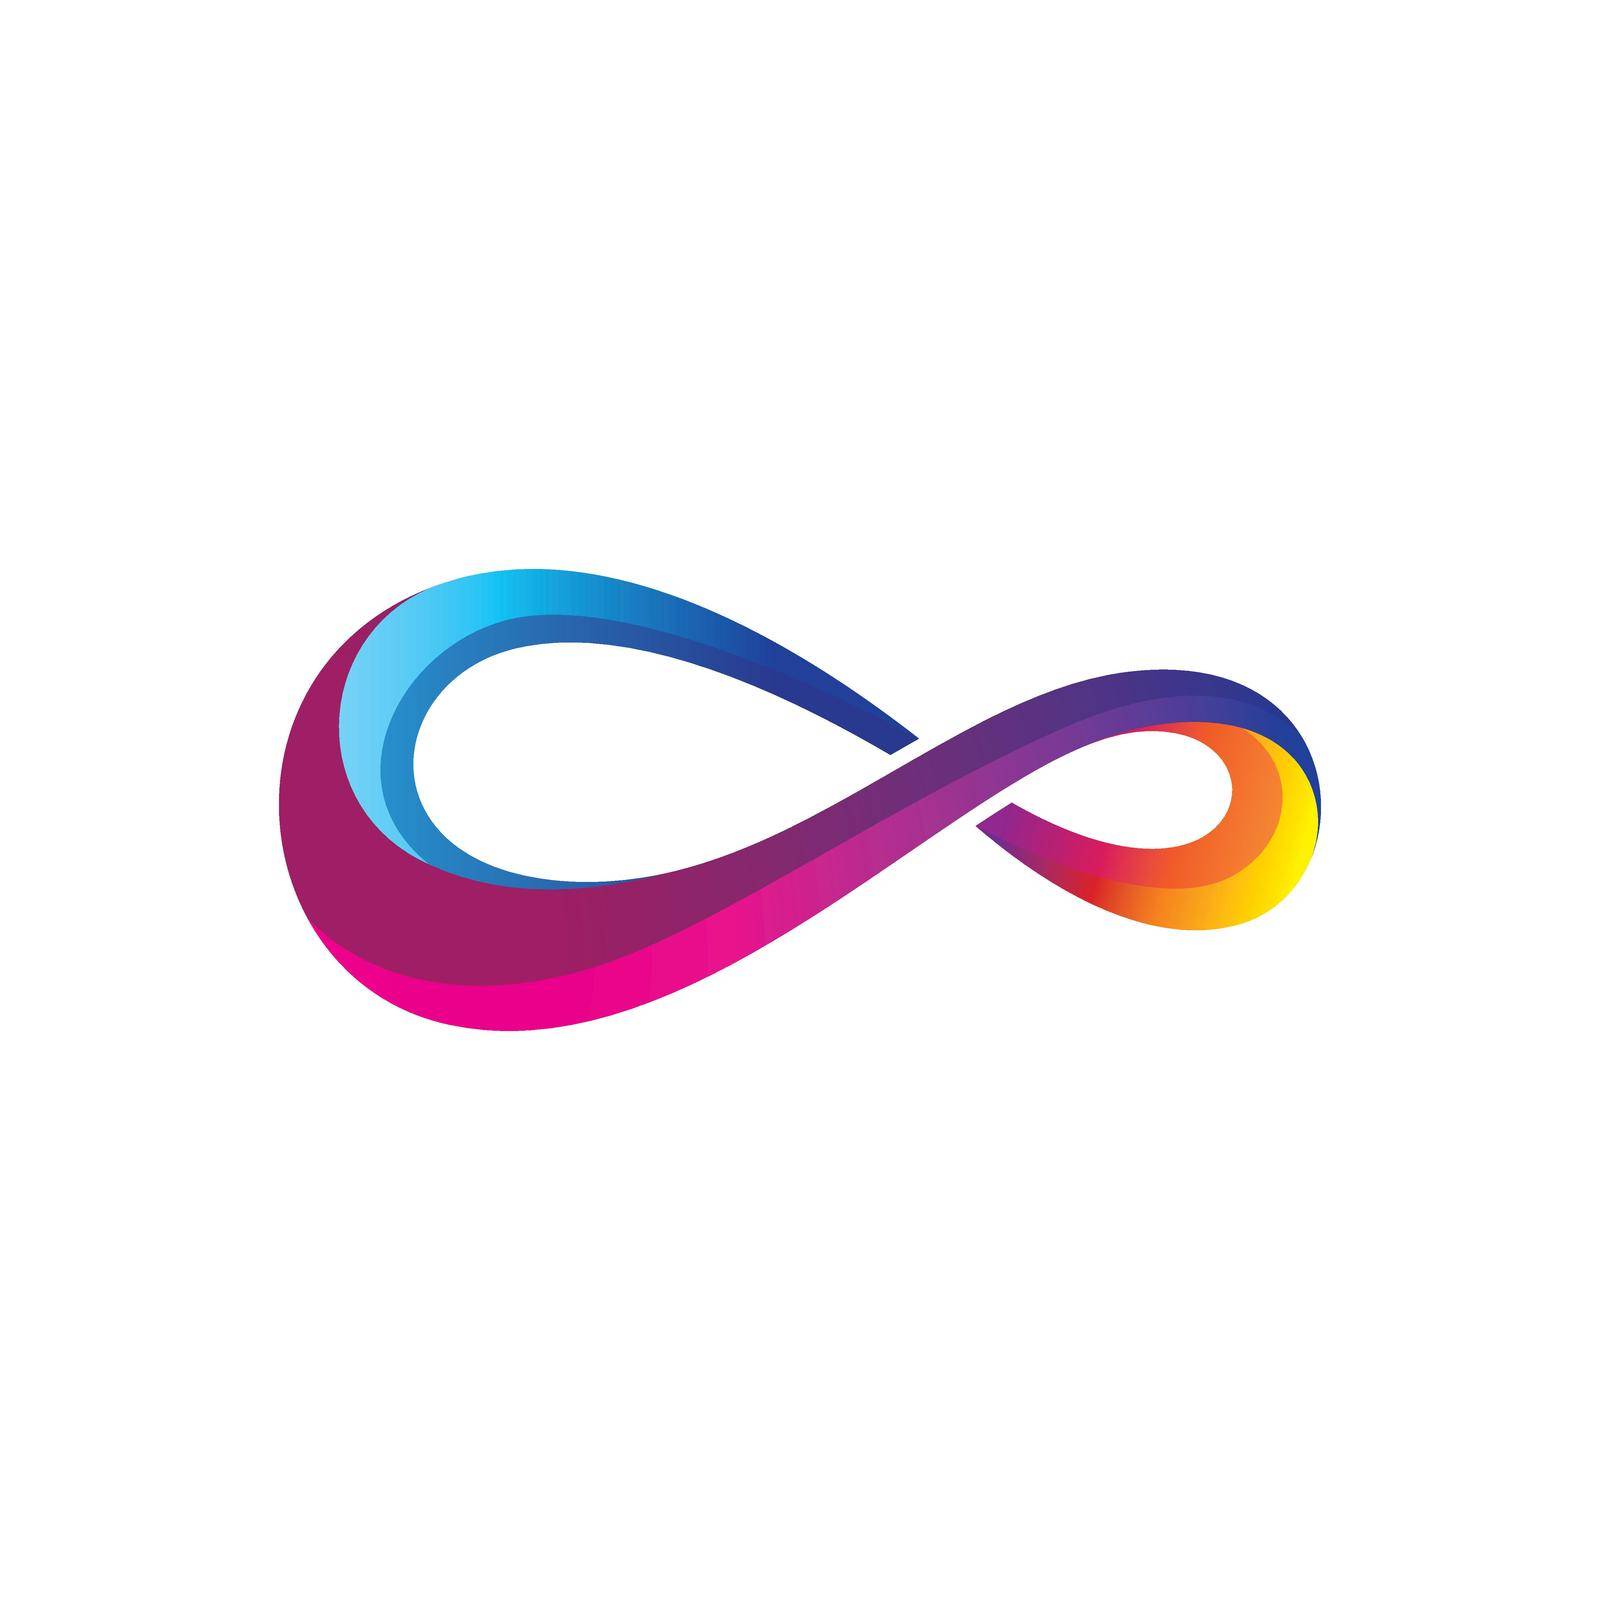 Infinity logo images by Fat17